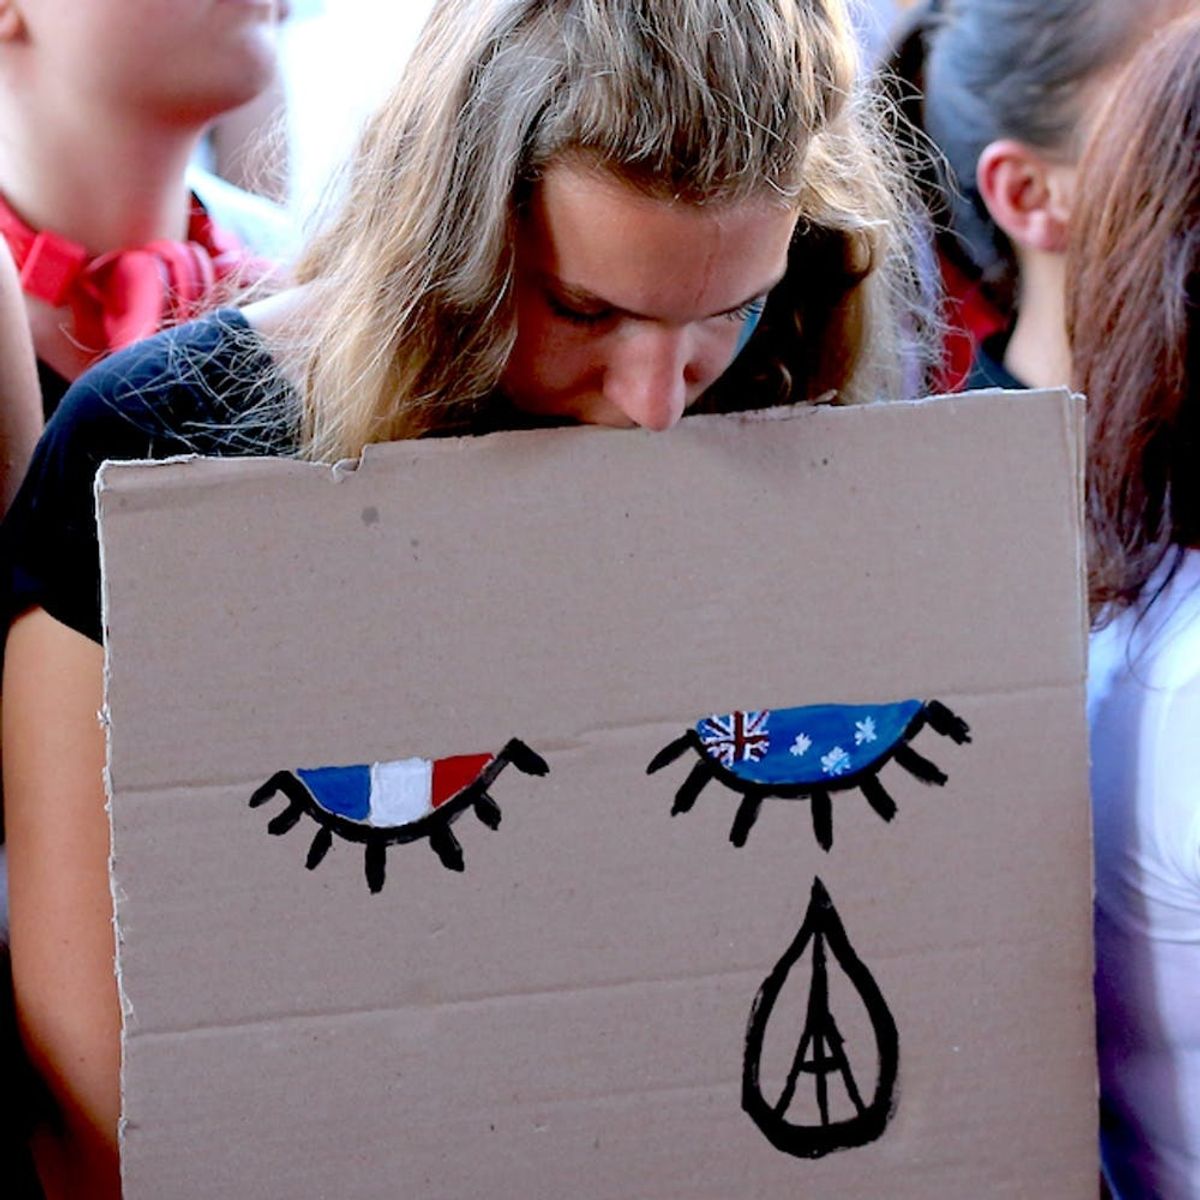 14 Photos of Tributes to the Victims of Paris That Will Give You Hope